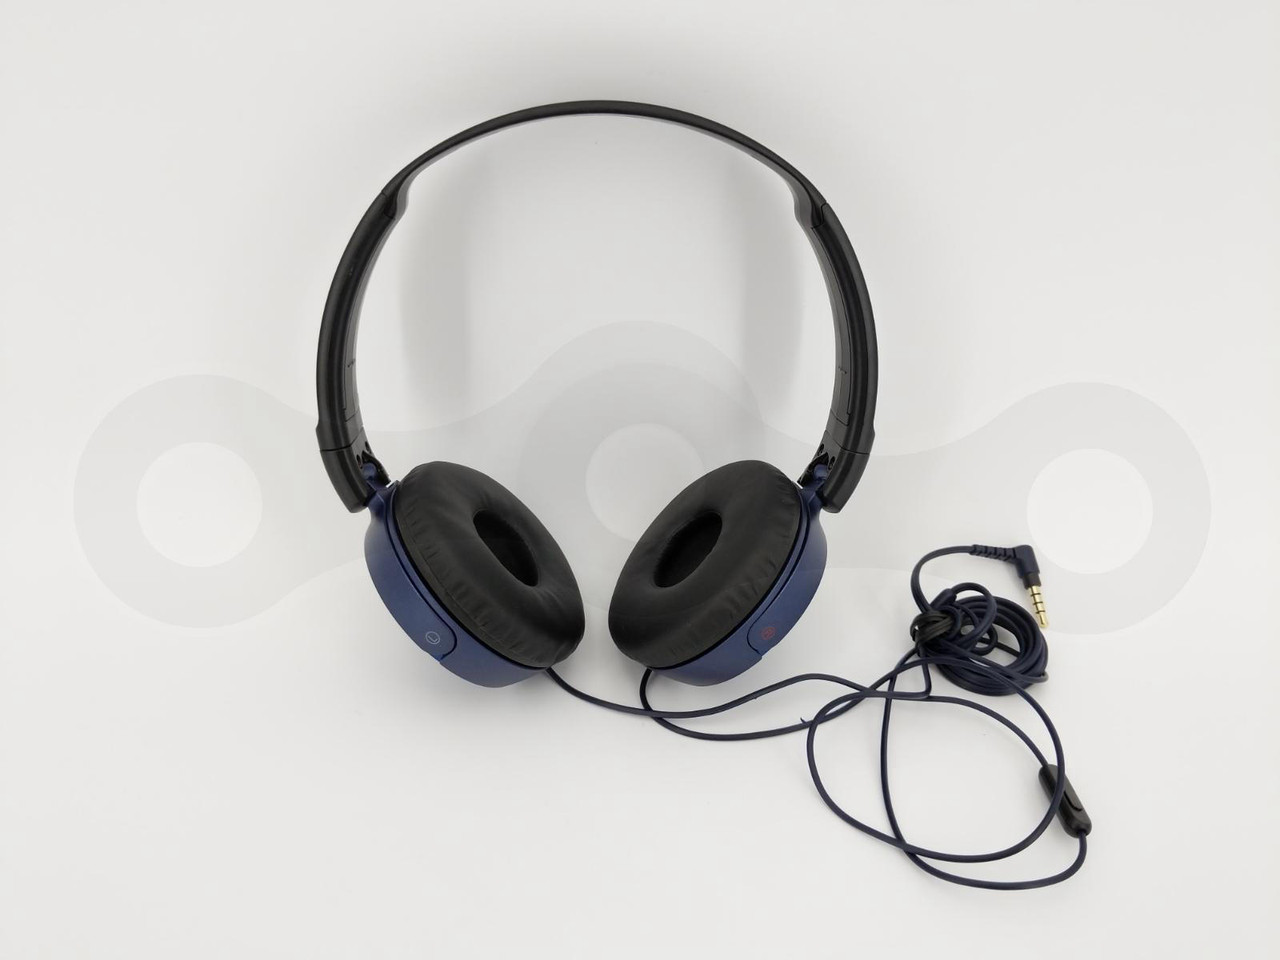 SONY MDR-ZX310 WIRED HEADPHONES COLLAPSIBLE HEADBAND MIC BLUE BLACK CORDED ONLY